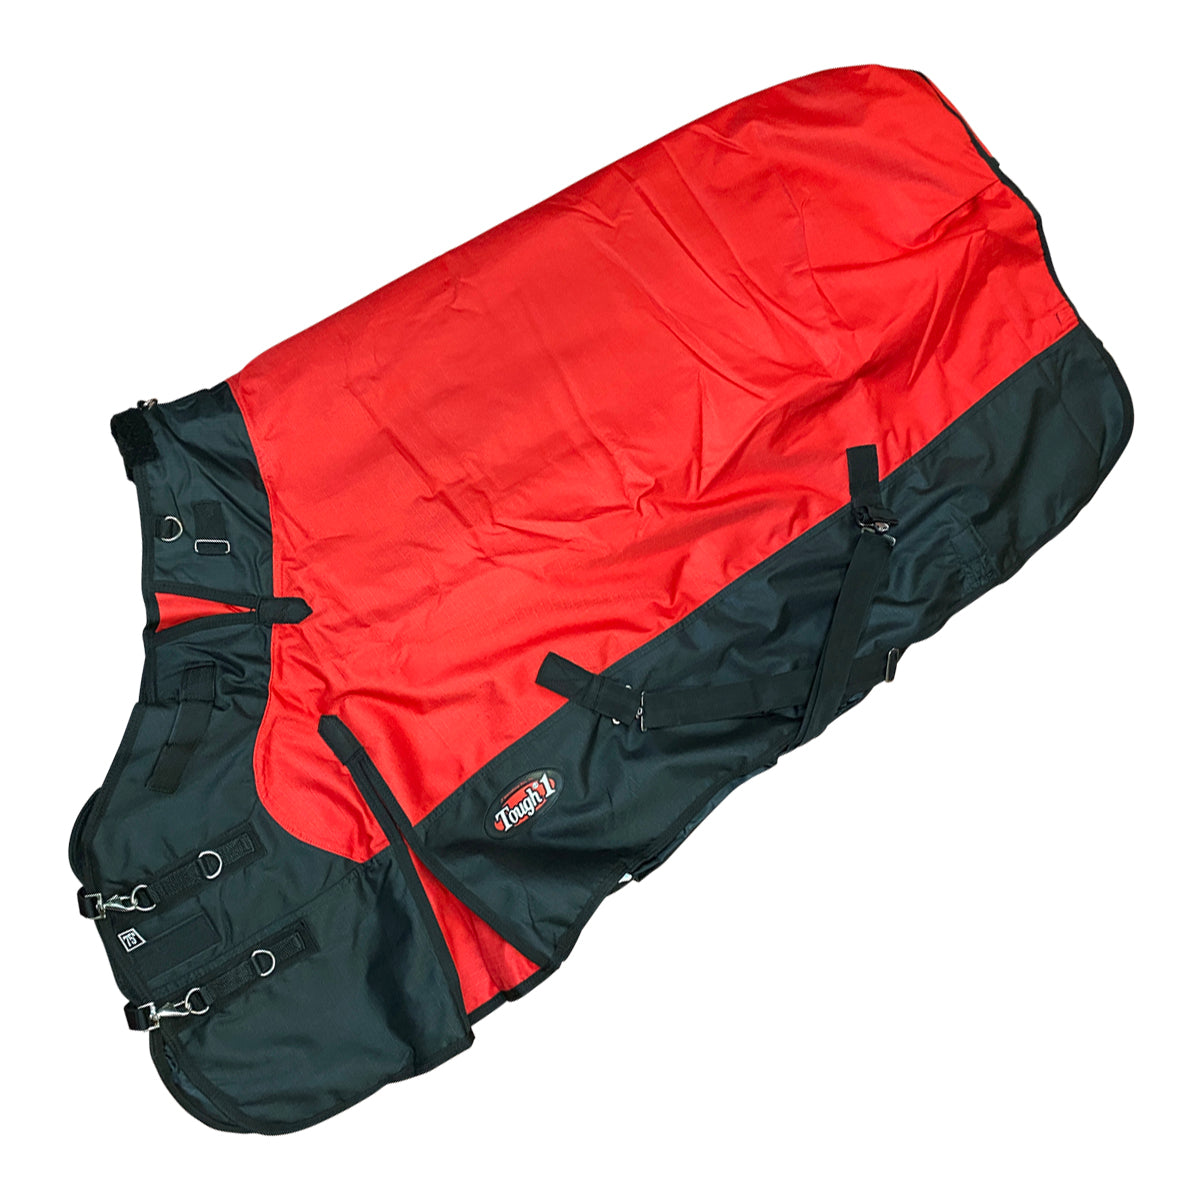 Tough1 1200D Snuggit Turnout 300g in Red/Black 